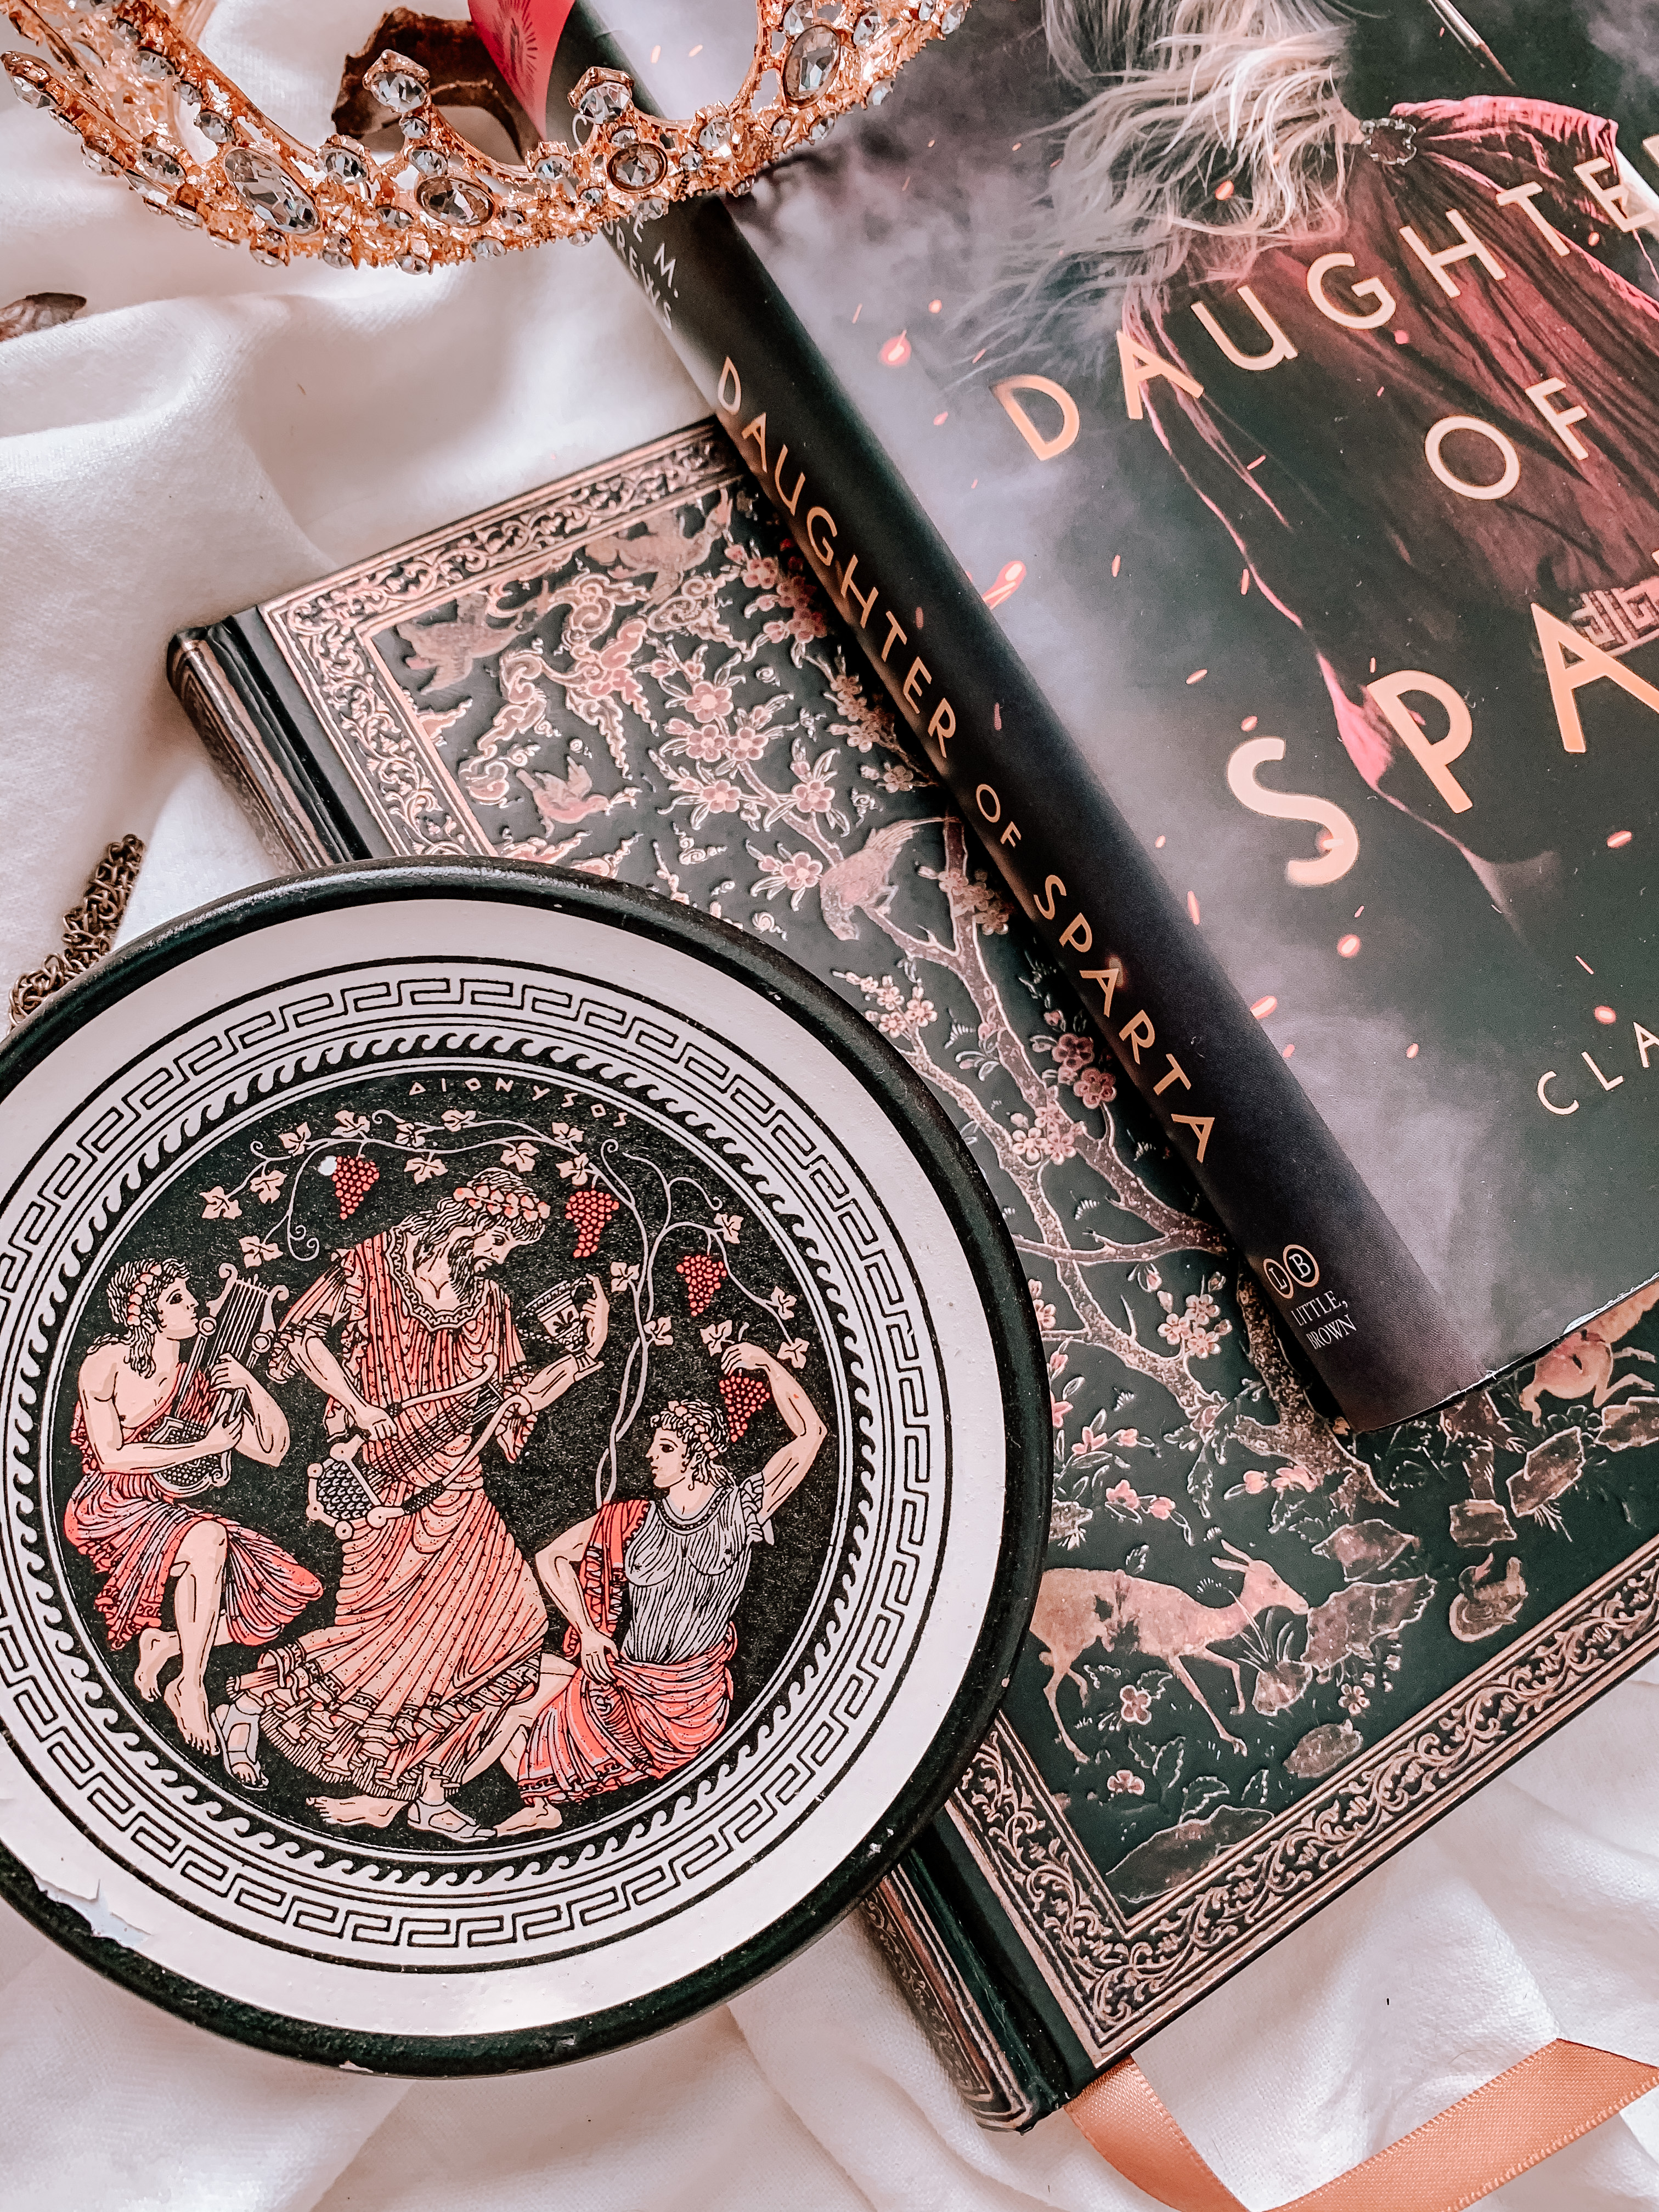 Close-up of a Greek dish hand painted with Dionysus on it, next to a notebook and the hardcover edition of Daughter of Sparta.